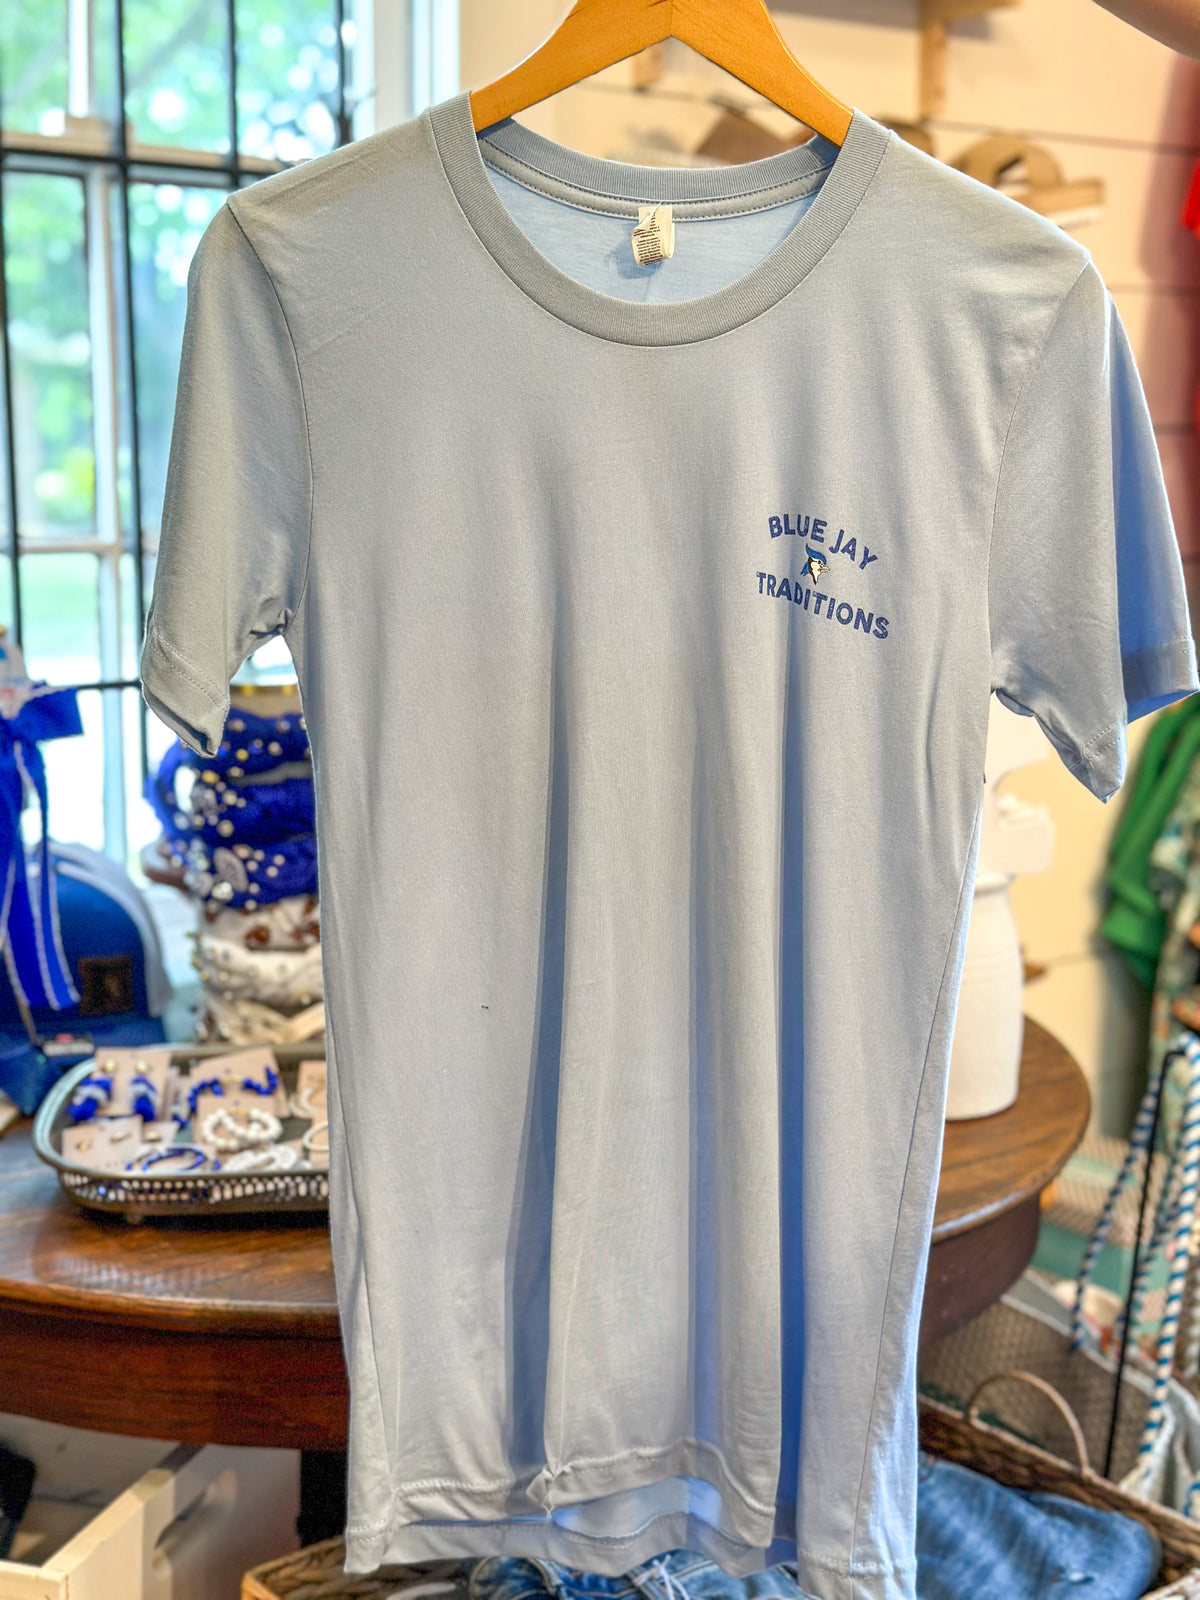 needville blue jay traditions tee front